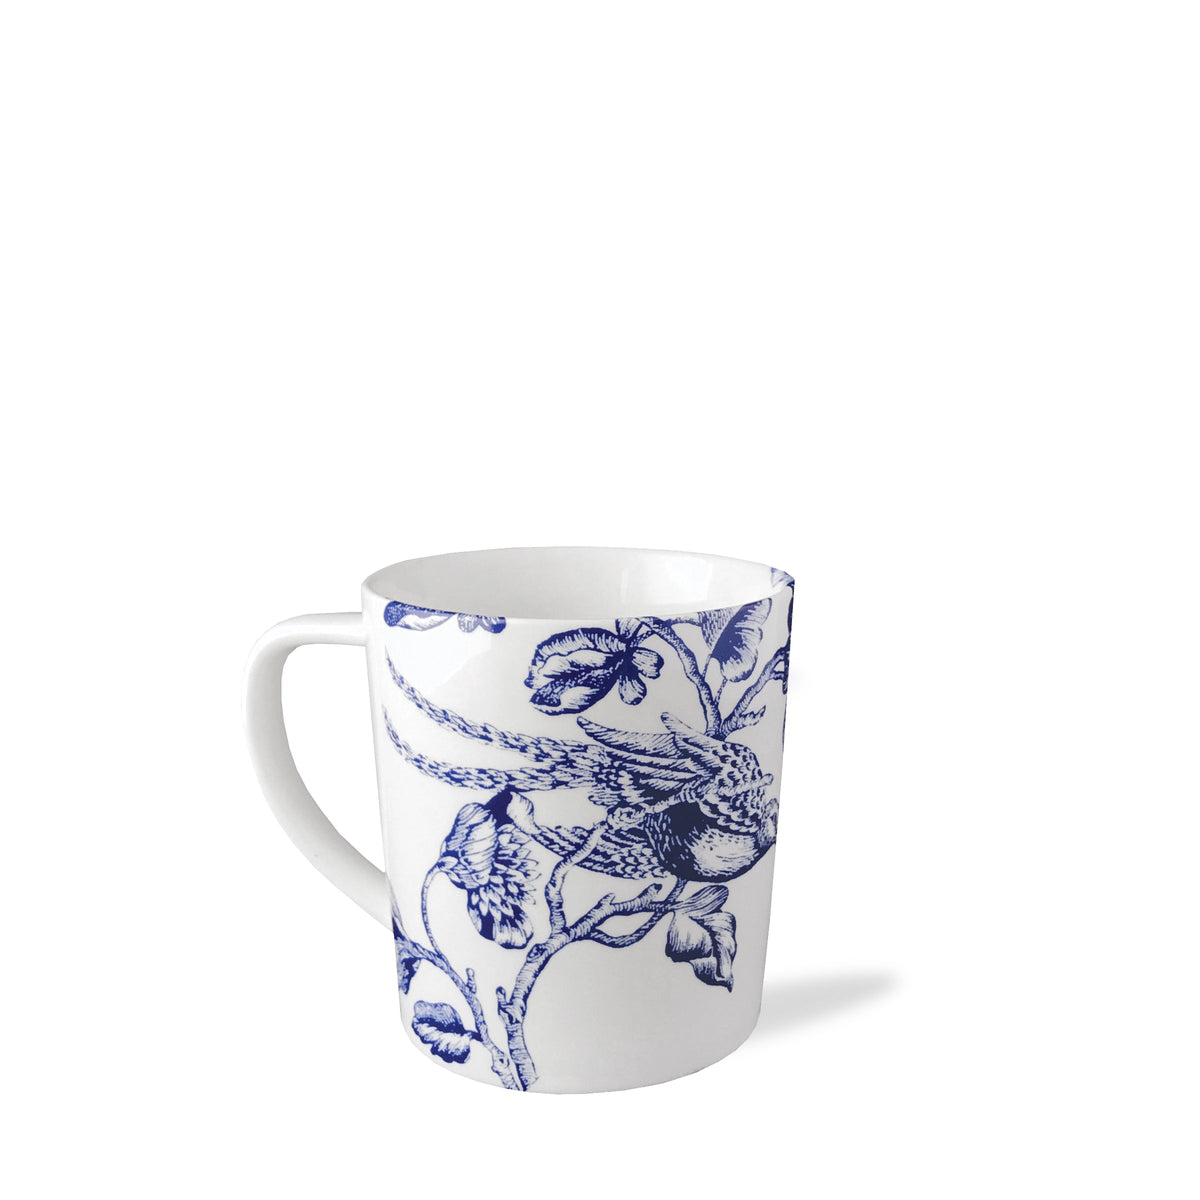 White ceramic mug with a blue floral and bird pattern, reminiscent of Chinoiserie Toile, displayed on a white background. Introducing the Chinoiserie Toile Mug by Caskata Artisanal Home.